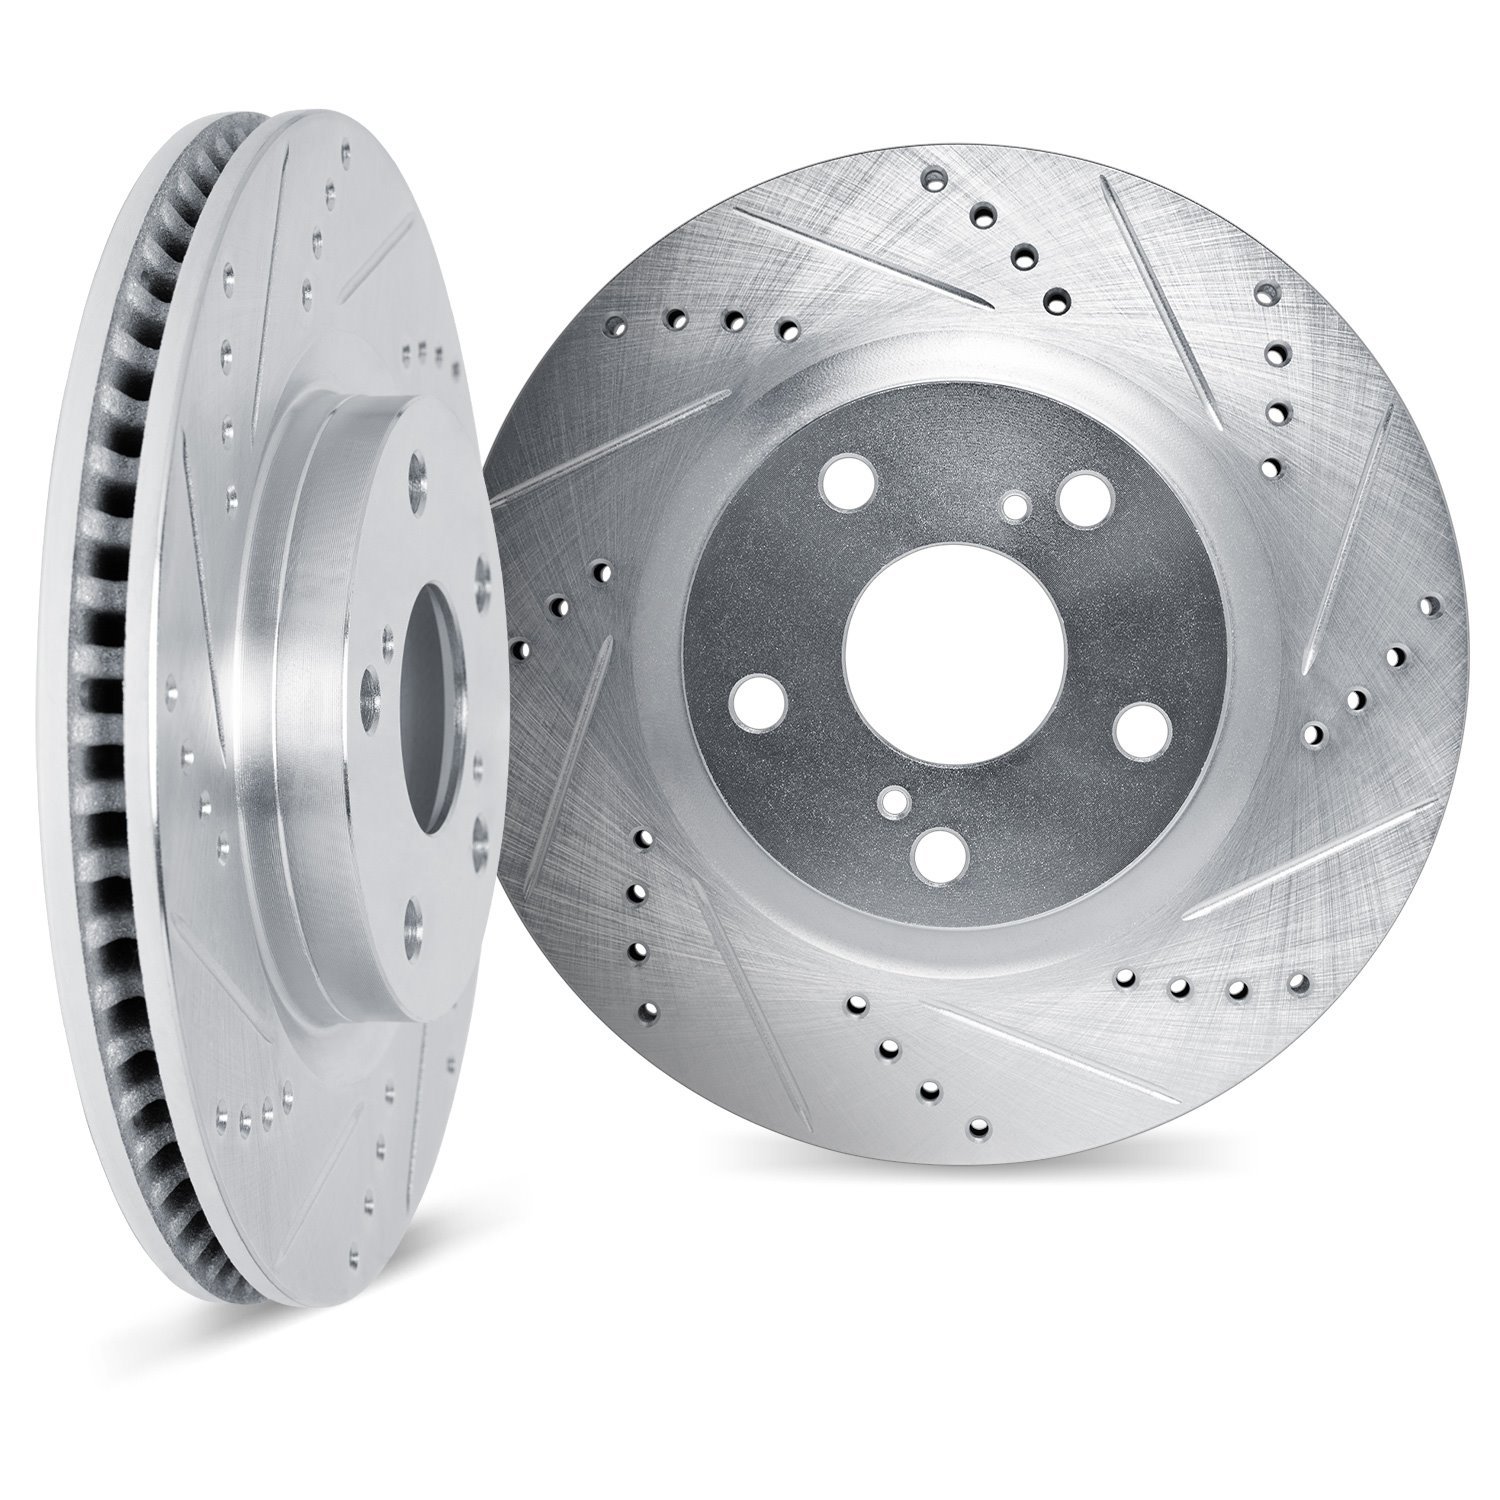 7002-55005 Drilled/Slotted Brake Rotors [Silver], Fits Select Ford/Lincoln/Mercury/Mazda, Position: Rear